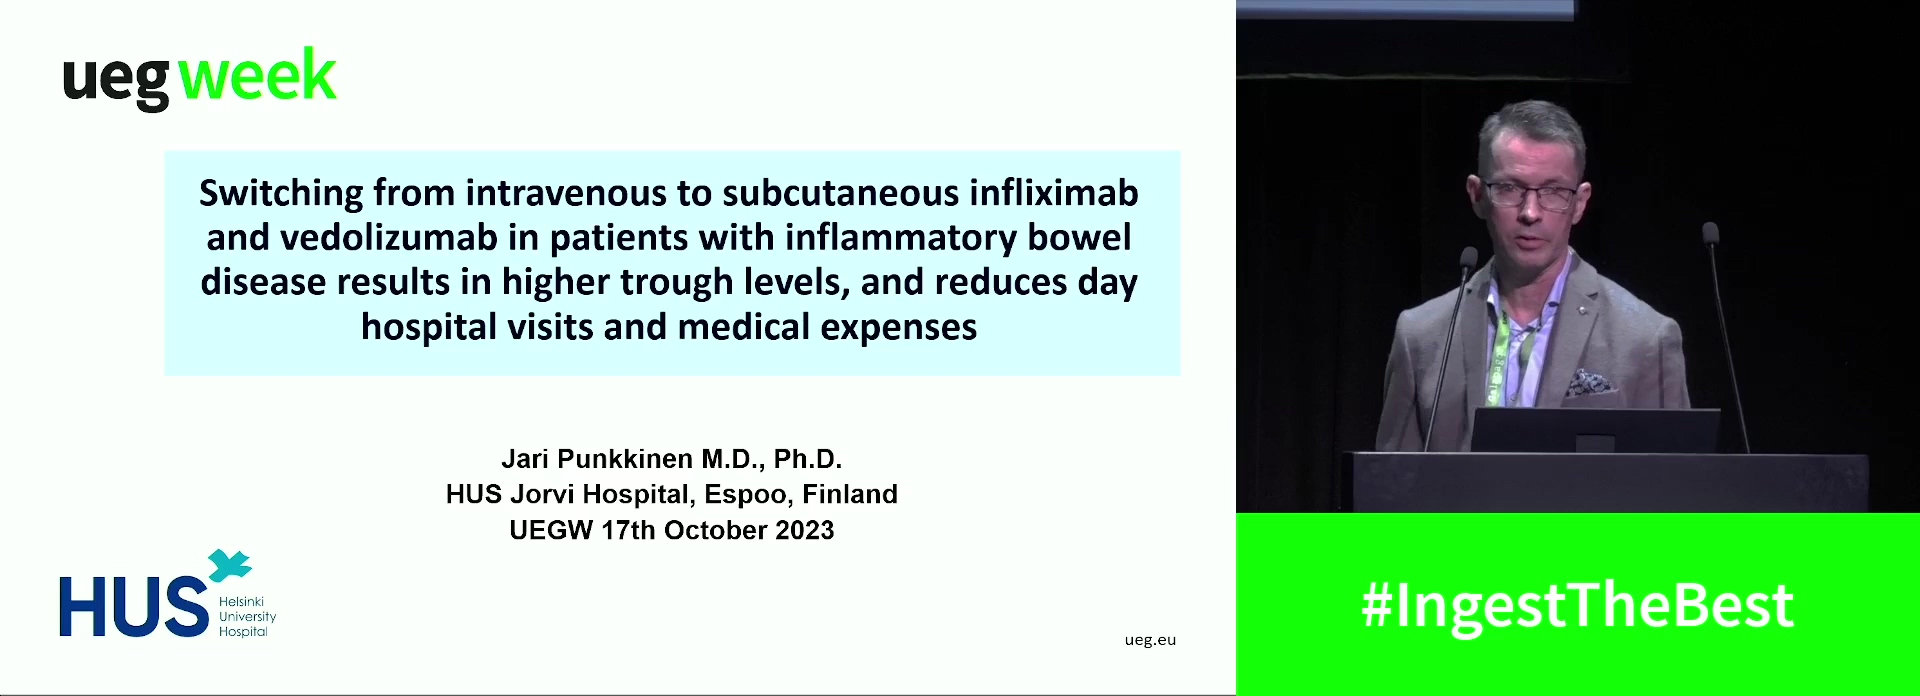 SWITCHING FROM INTRAVENOUS TO SUBCUTANEOUS INFLIXIMAB AND VEDOLIZUMAB IN PATIENTS WITH INFLAMMATORY BOWEL DISEASE RESULTS IN HIGHER TROUGH LEVELS, AND REDUCES DAY HOSPITAL VISITS AND MEDICAL EXPENSES